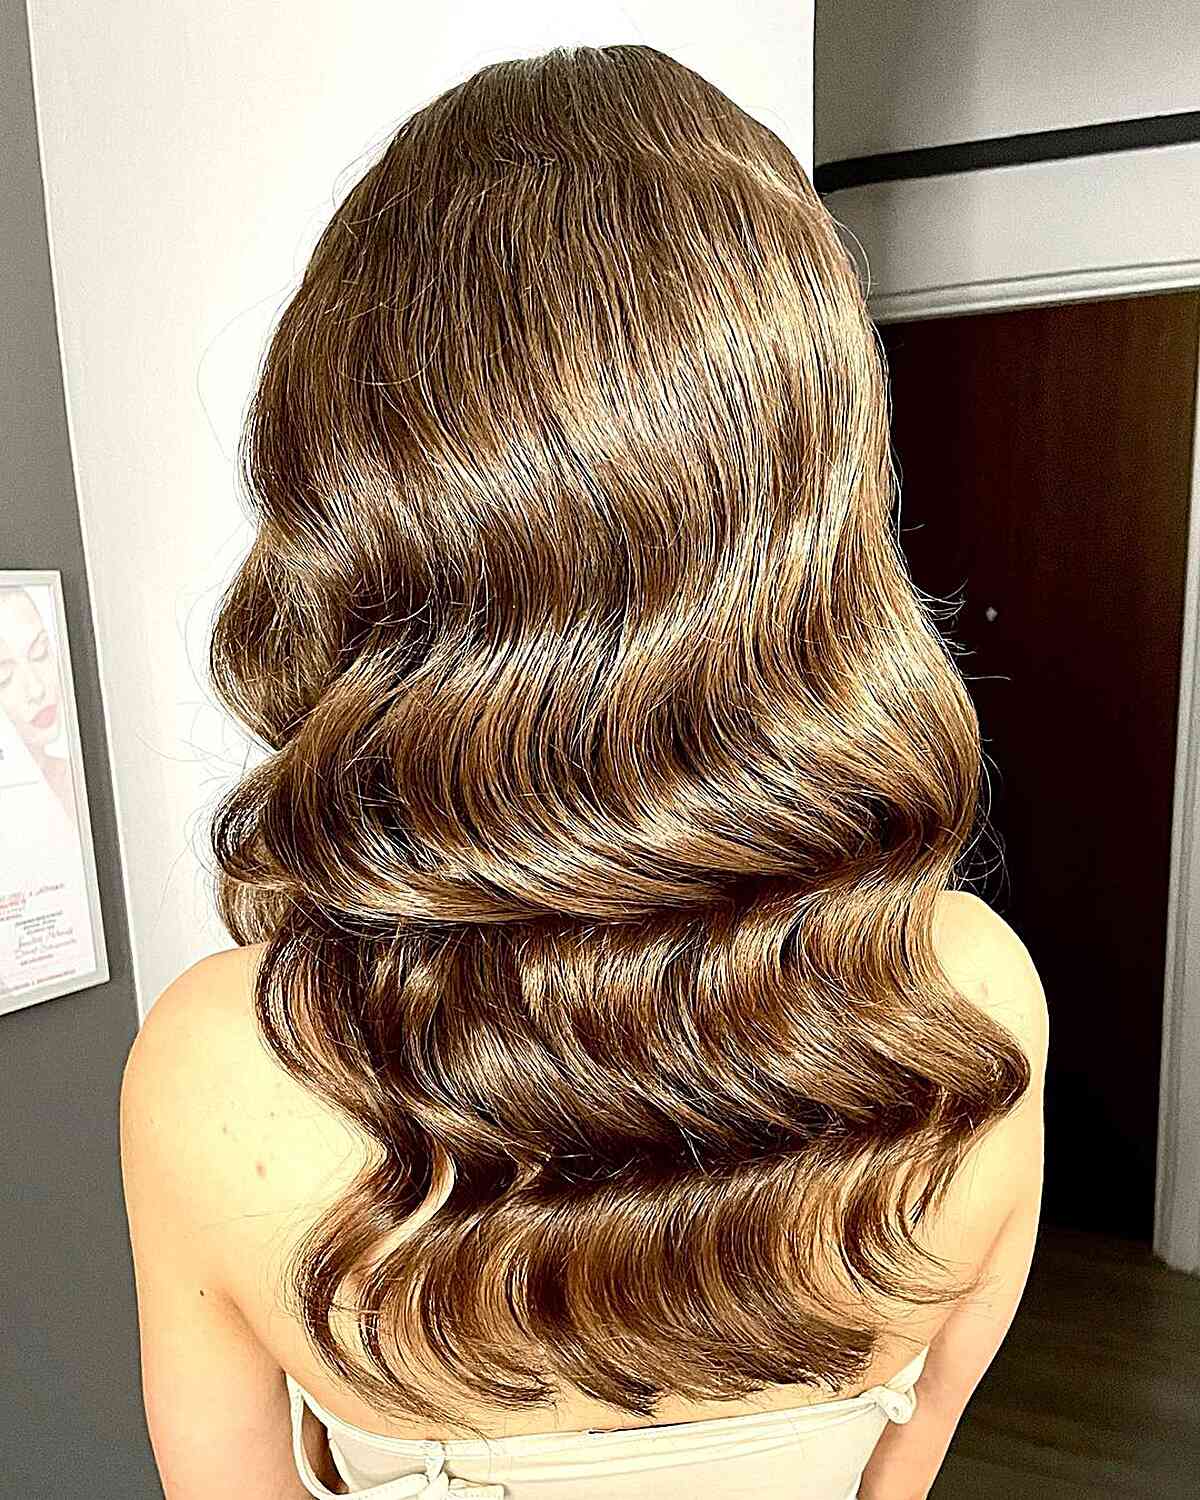 Hollywood-Style Big Waves for Long Hair